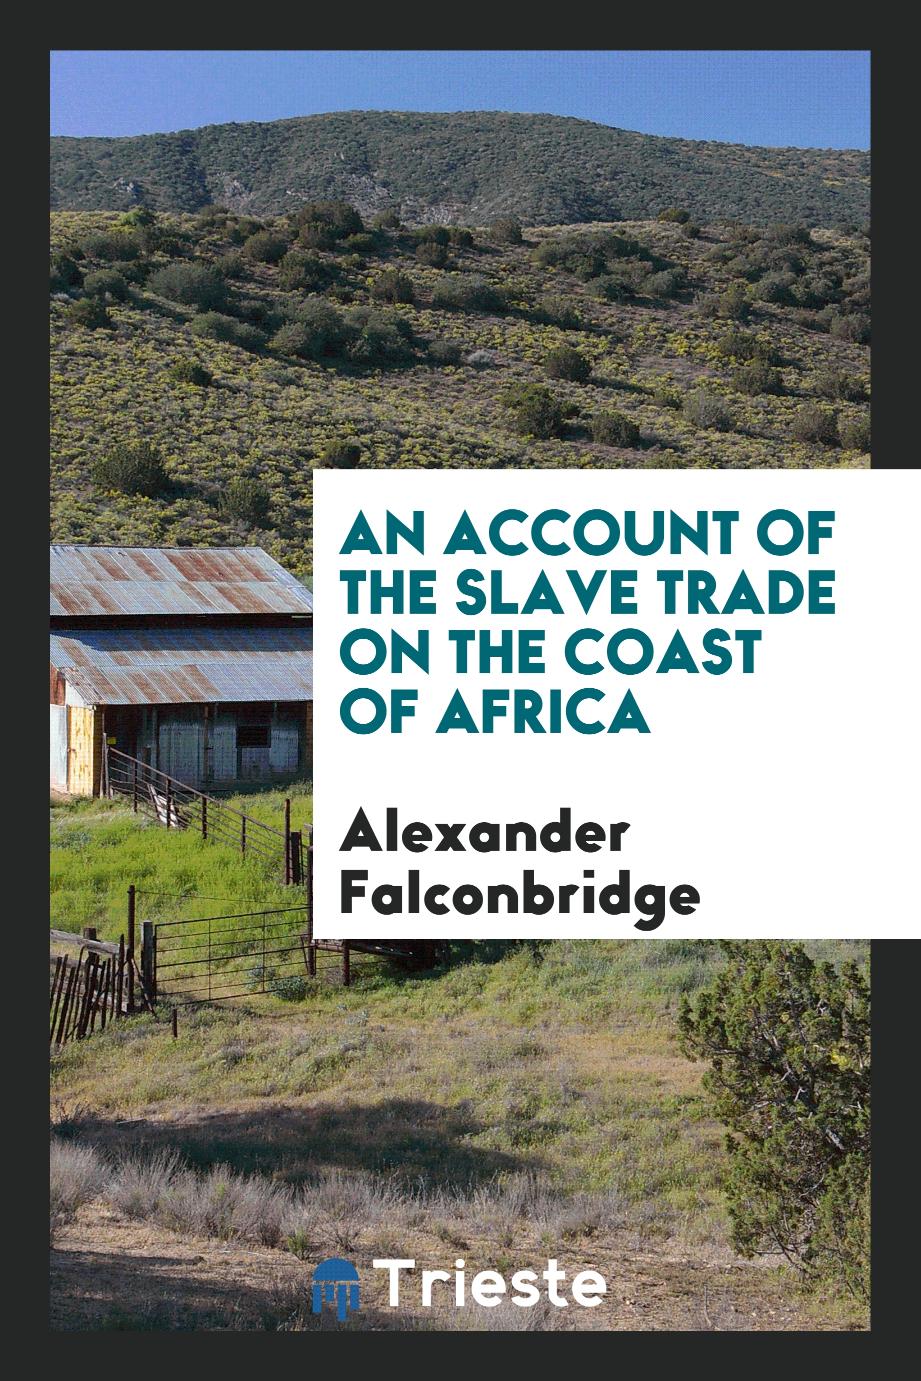 Alexander Falconbridge - An Account of the Slave Trade on the Coast of Africa